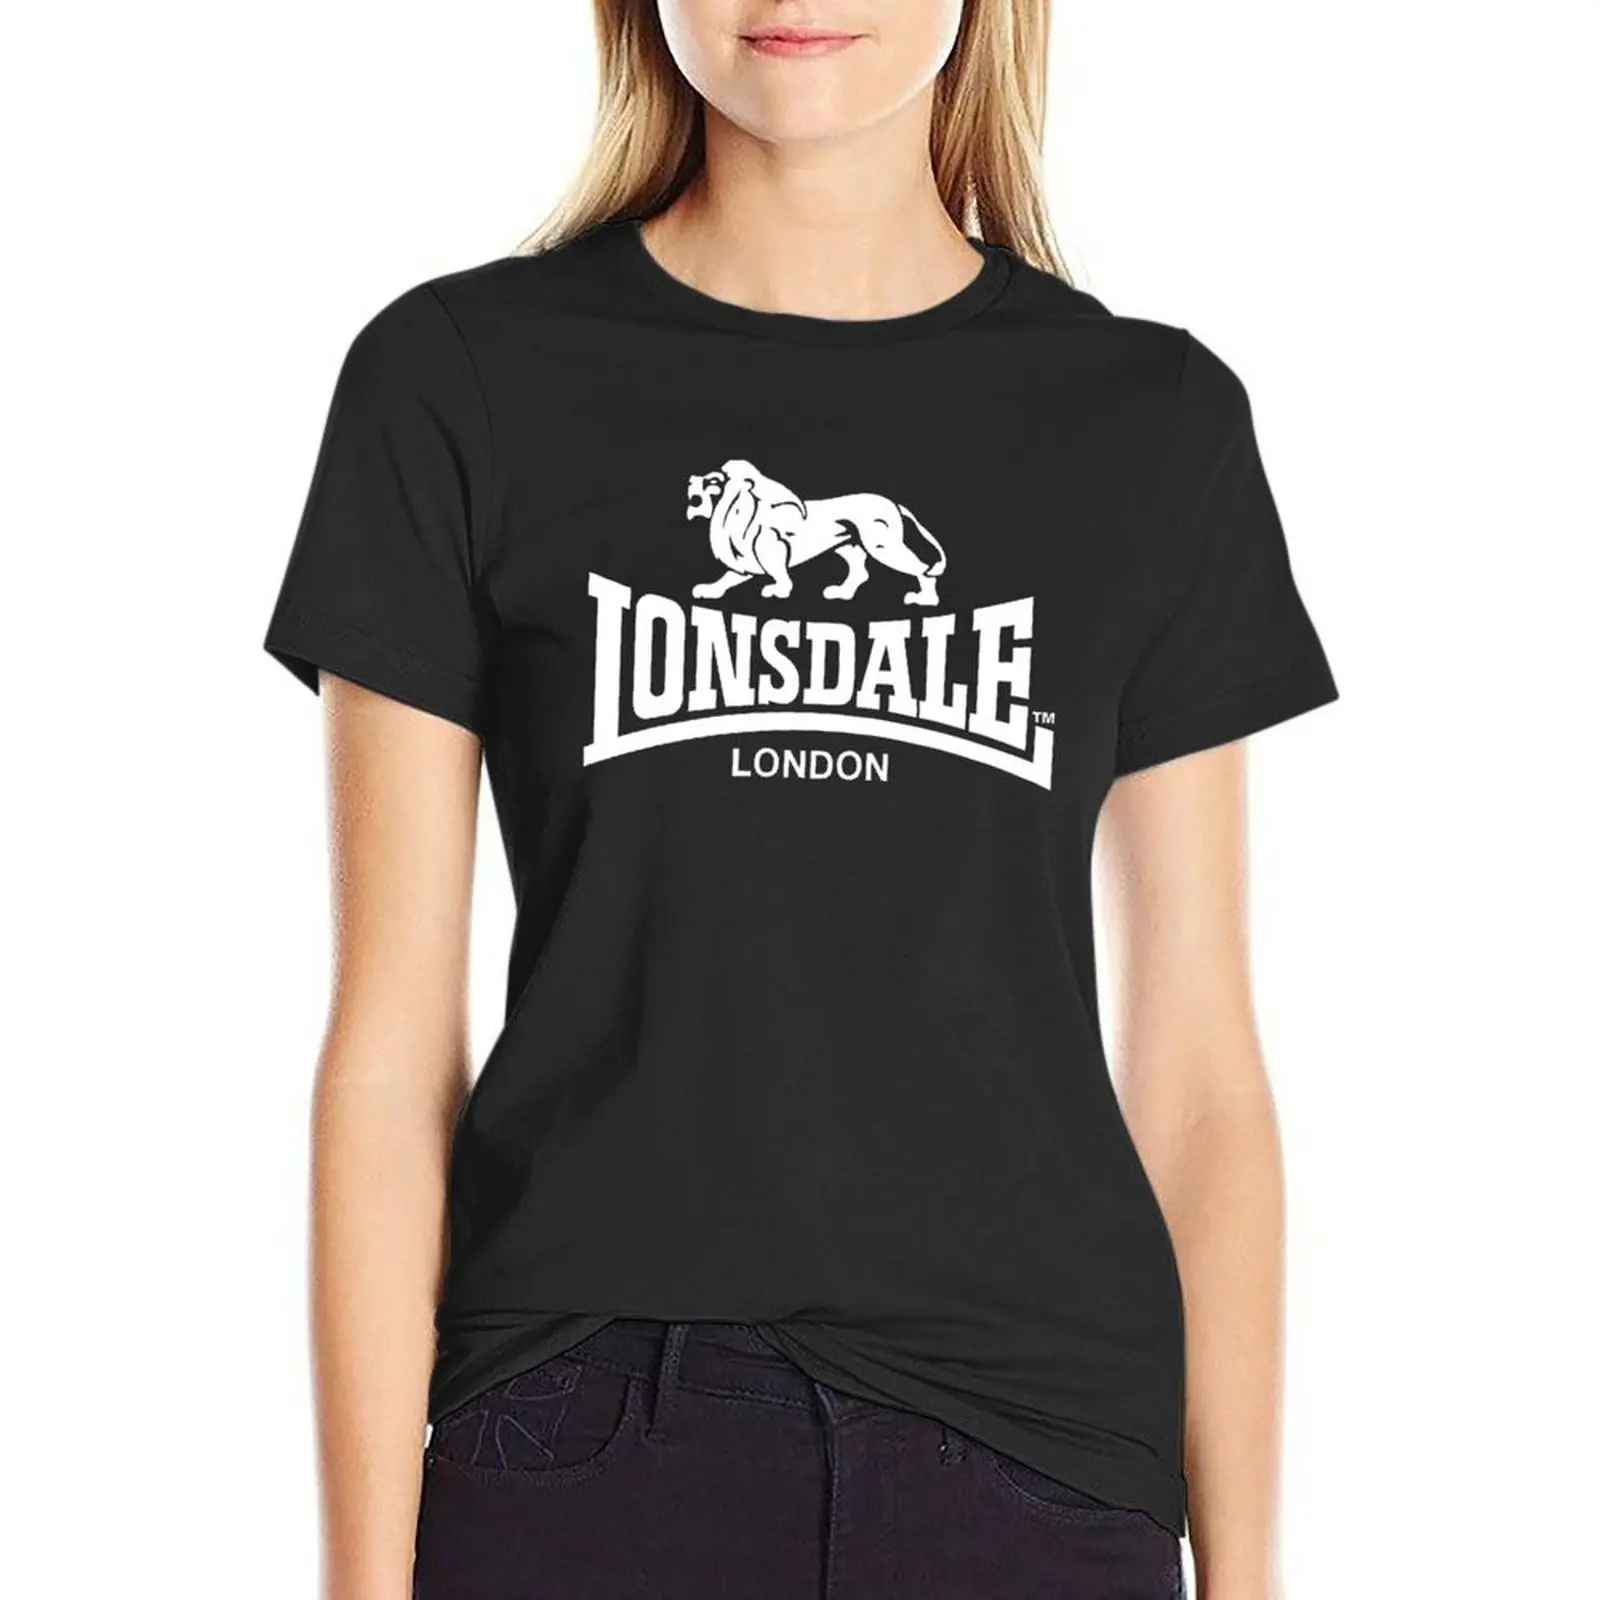 

Lonsdale London T-shirt plus size tops summer clothes summer top Womens graphic t shirts